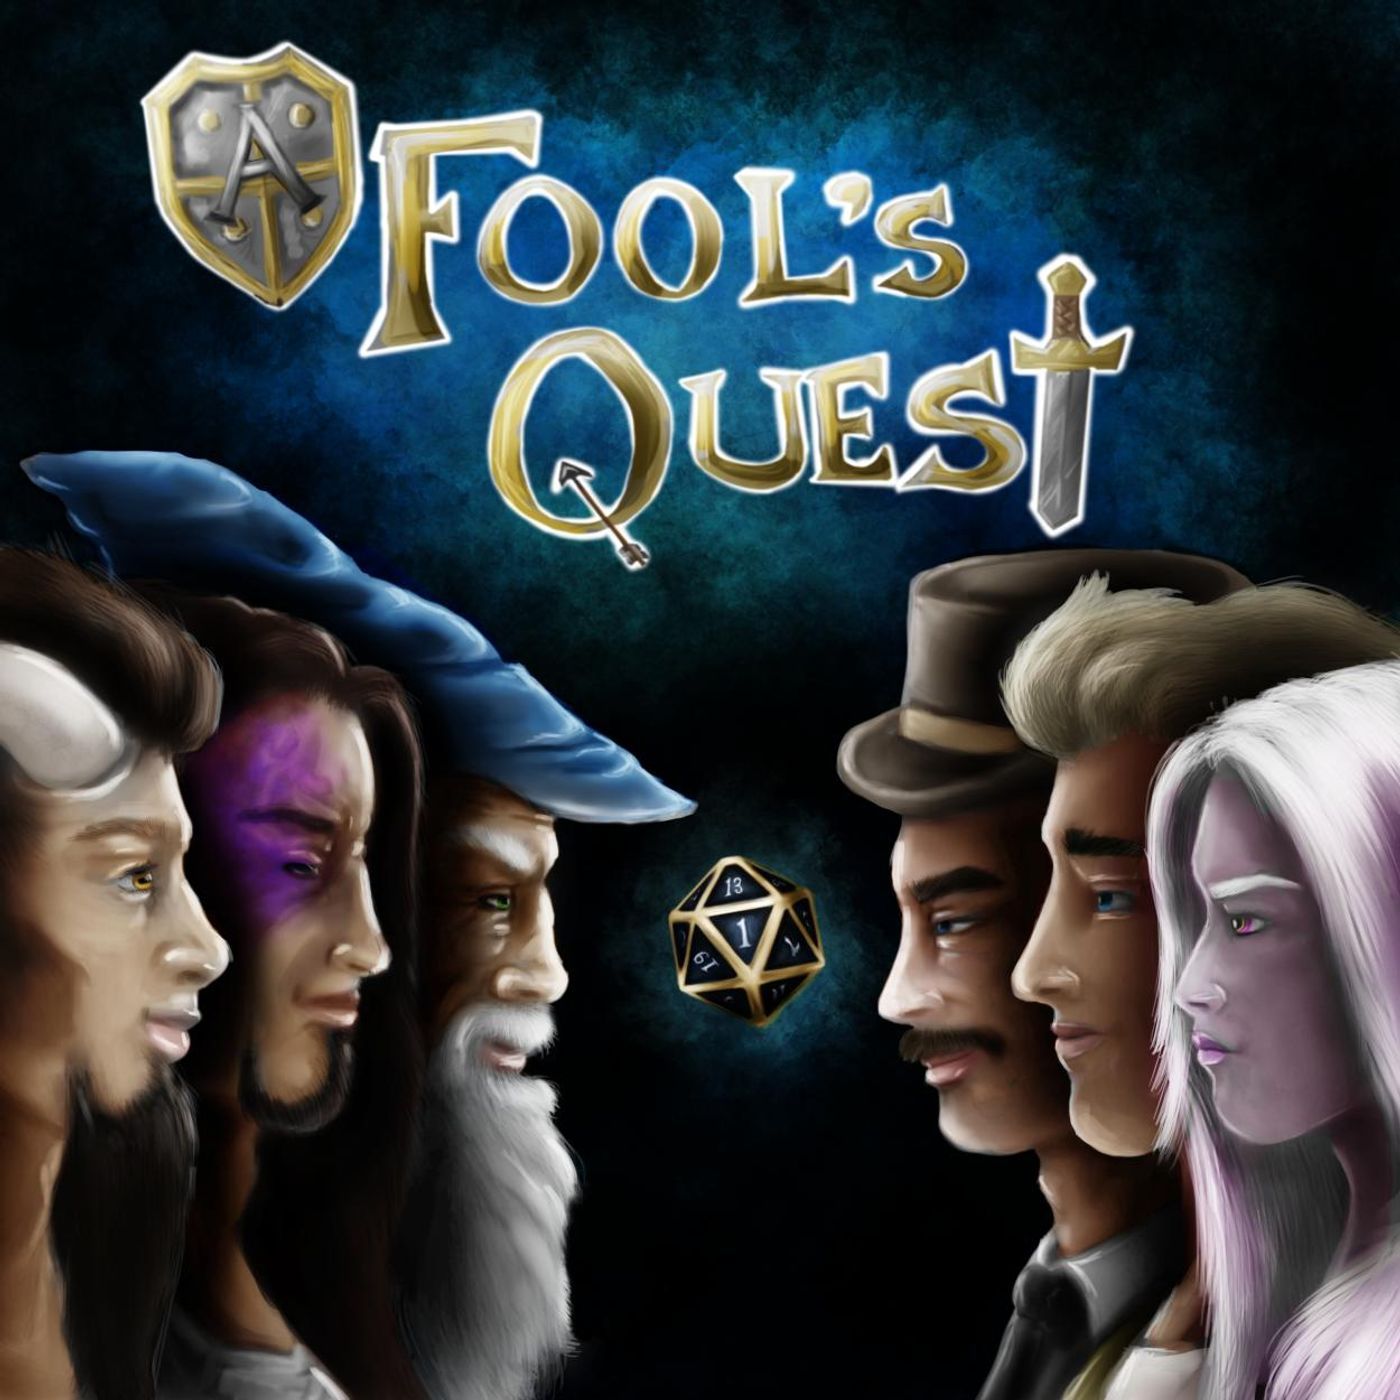 A Fool's Quest: DnD Comedy podcast